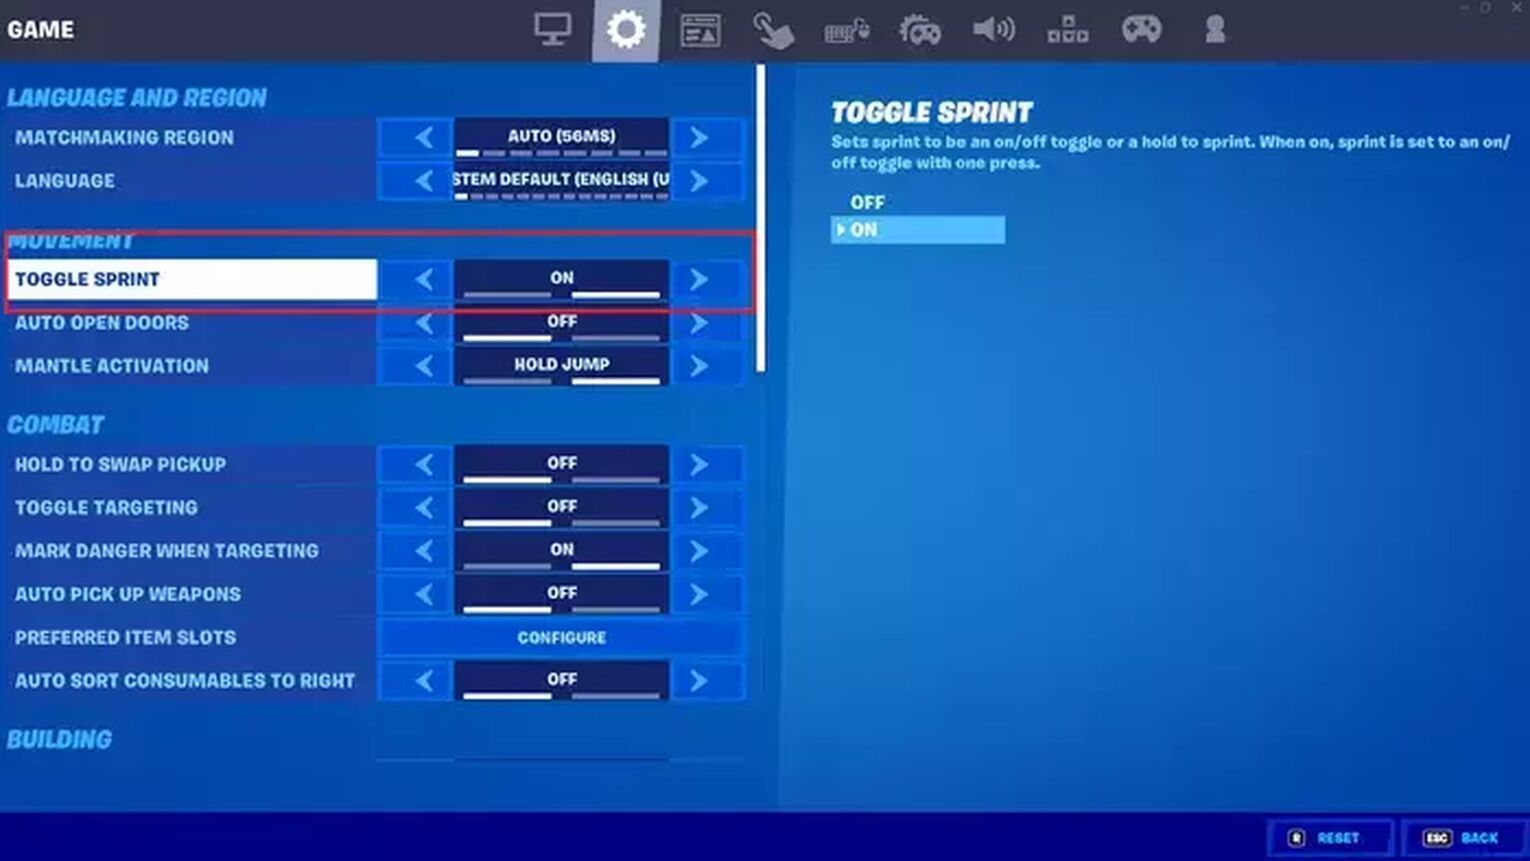 How To Auto Run in Fortnite on PC